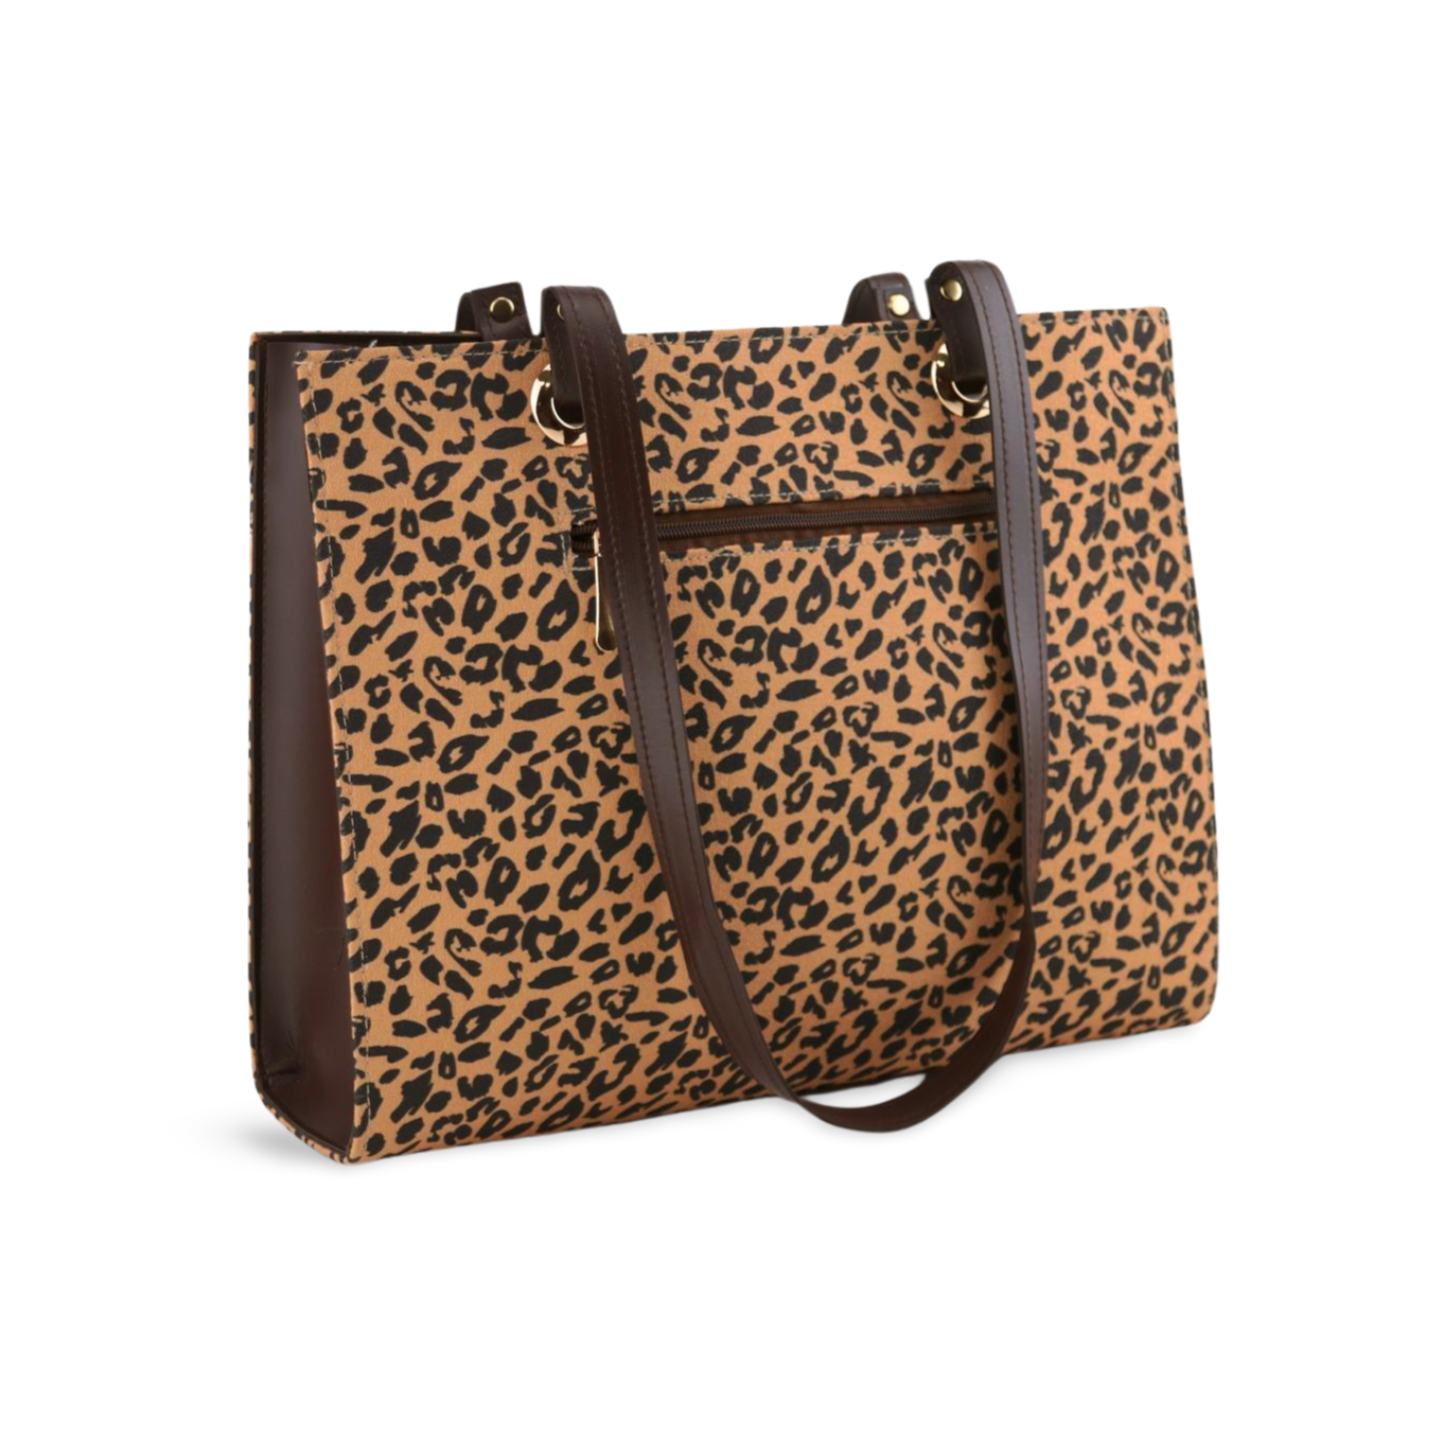 Stylish Canvas Print Leopard Tote Bag: Luxury Style for Everyday